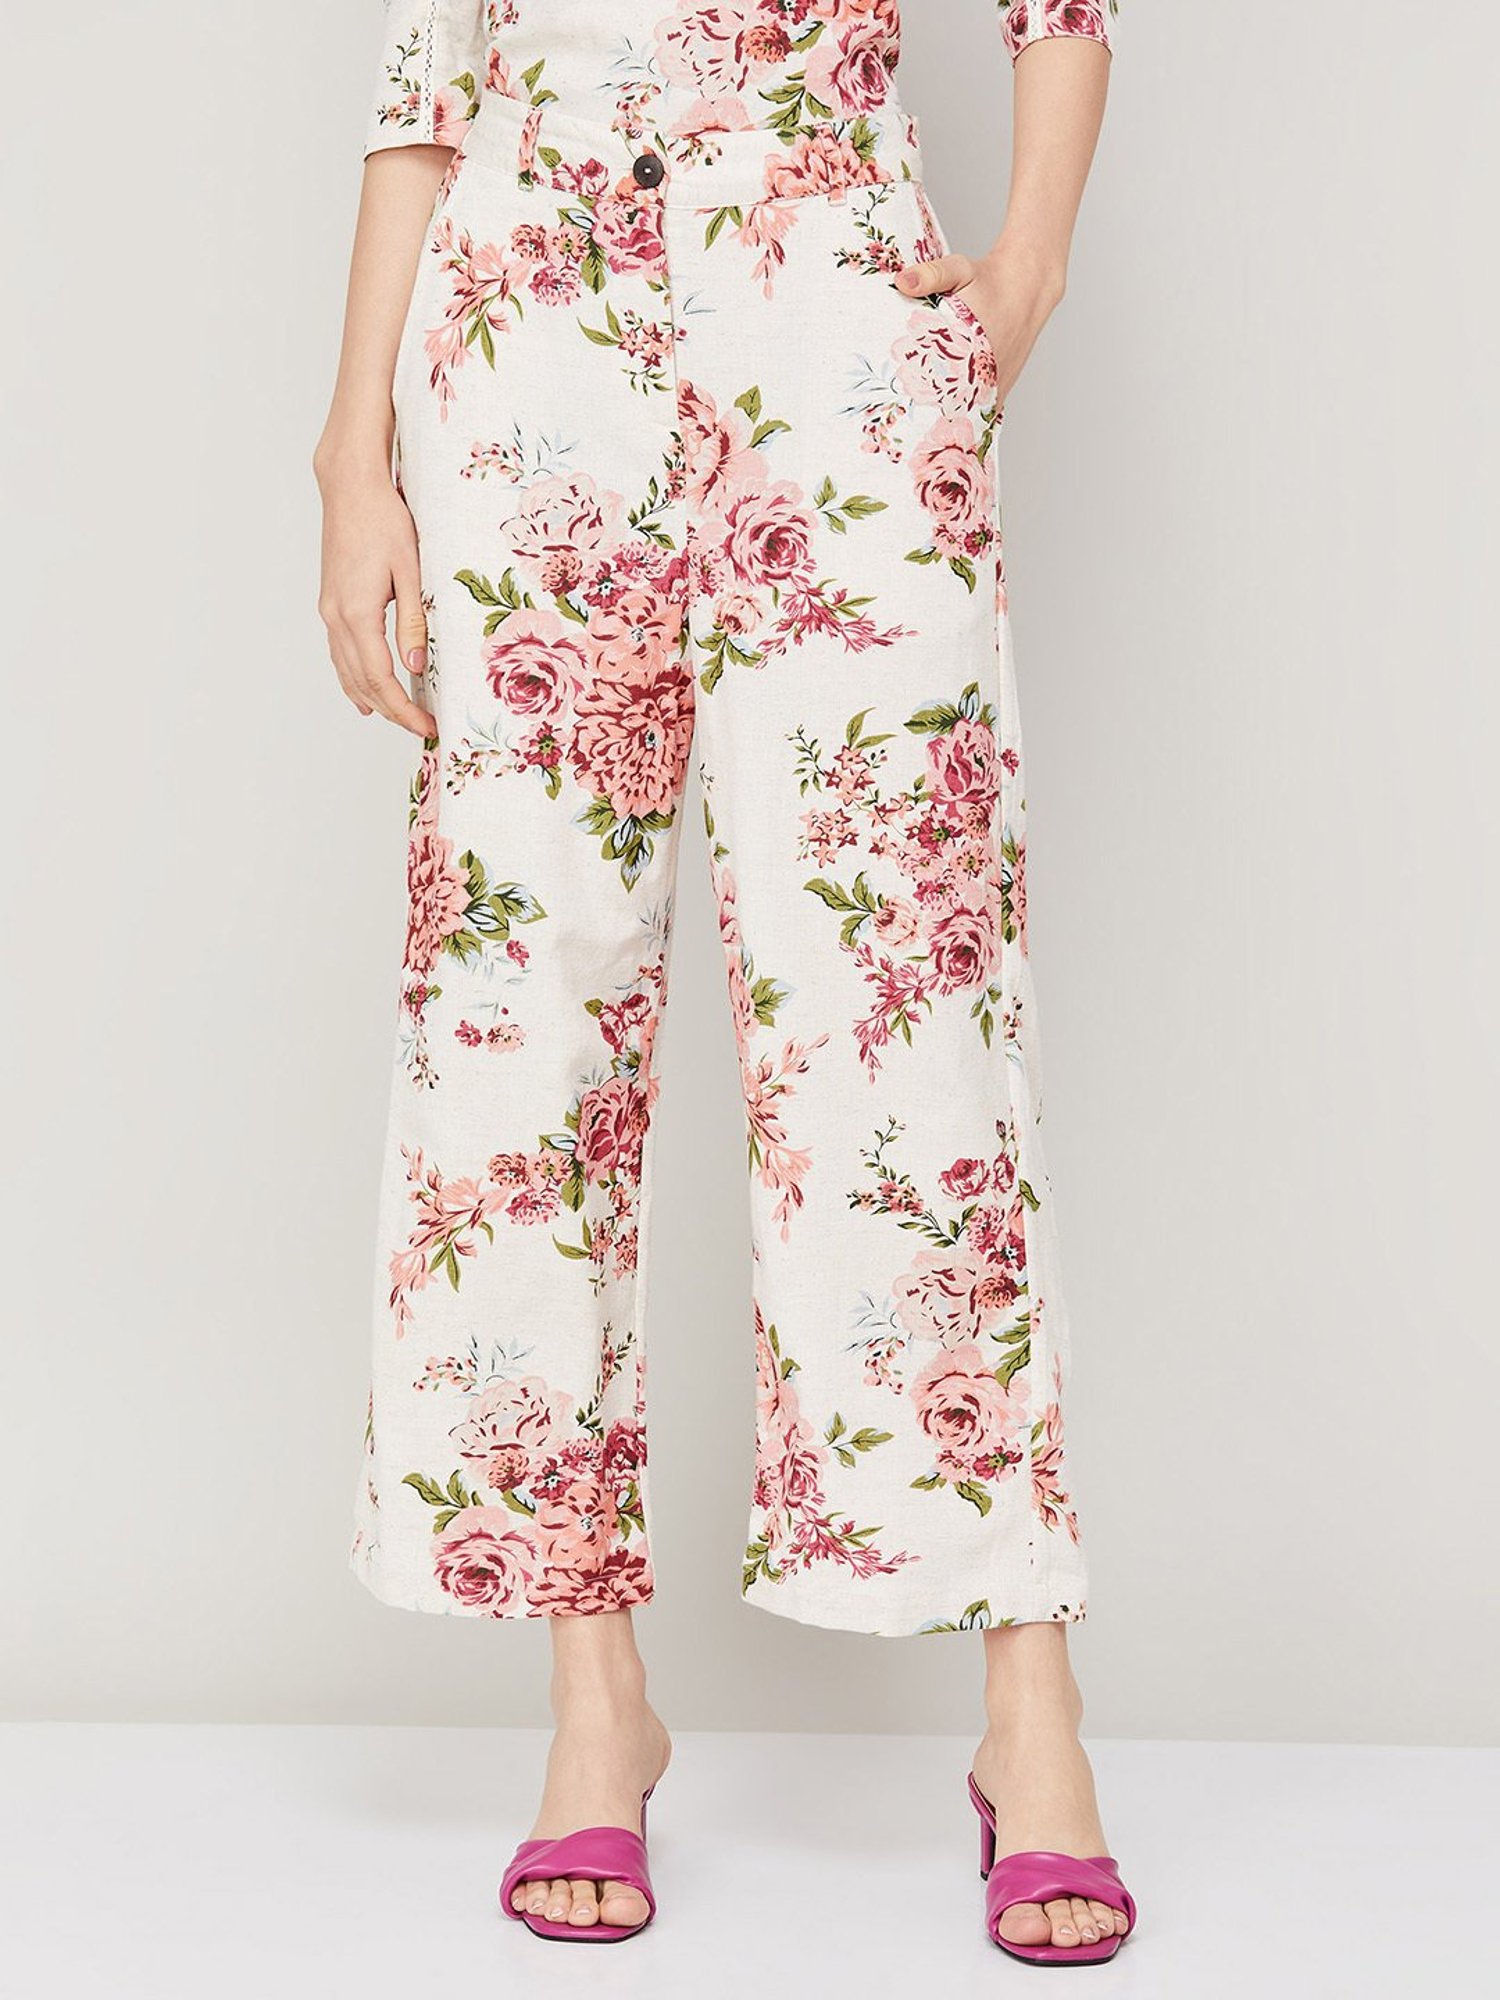 DAHLIA flared floral pants – by Green Cotton COM